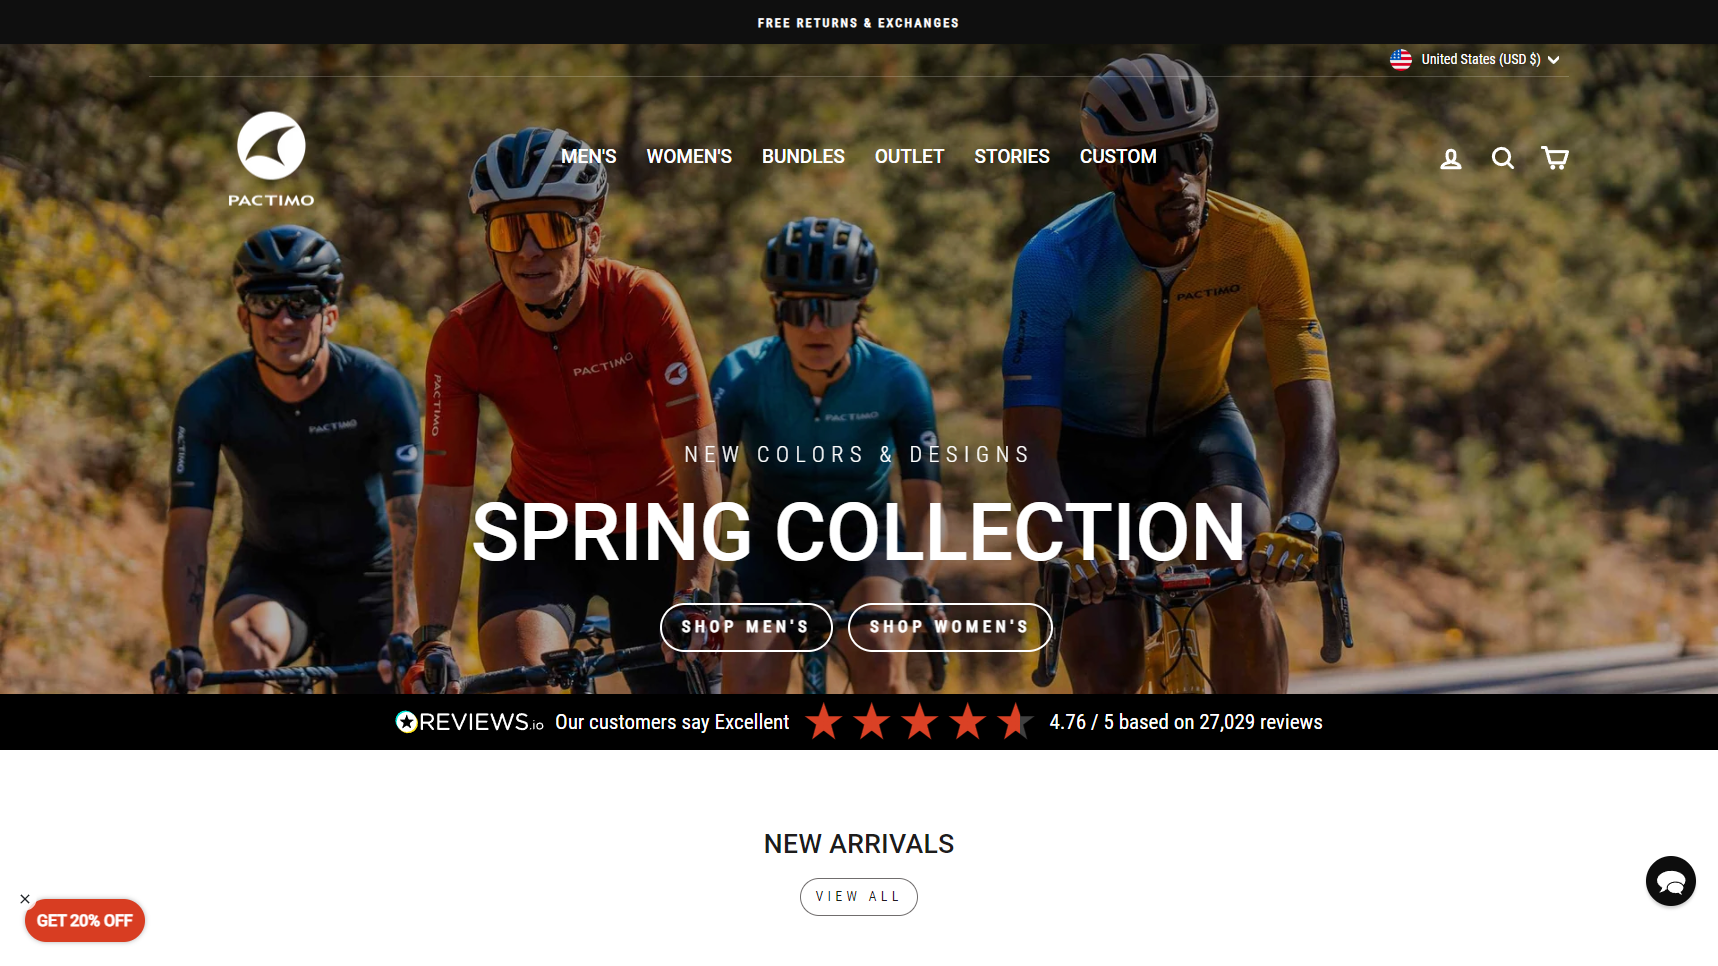 Pactimo - Cycling Jersey Manufacturer